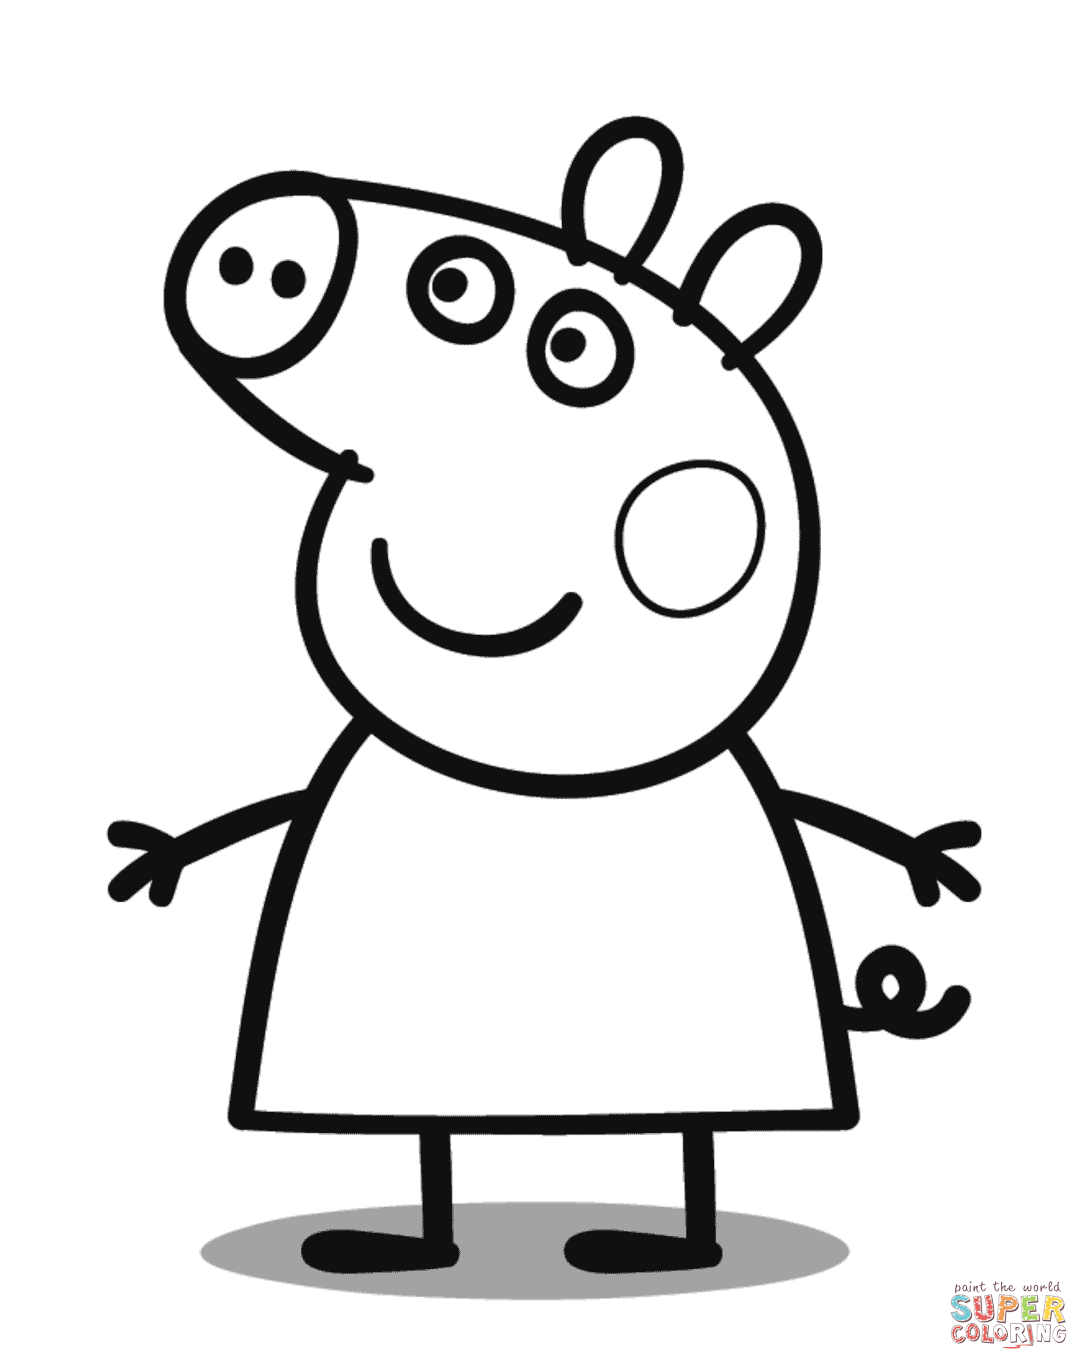 the-peppa-pig-coloring-page-free-printable-coloring-pages-for-kids